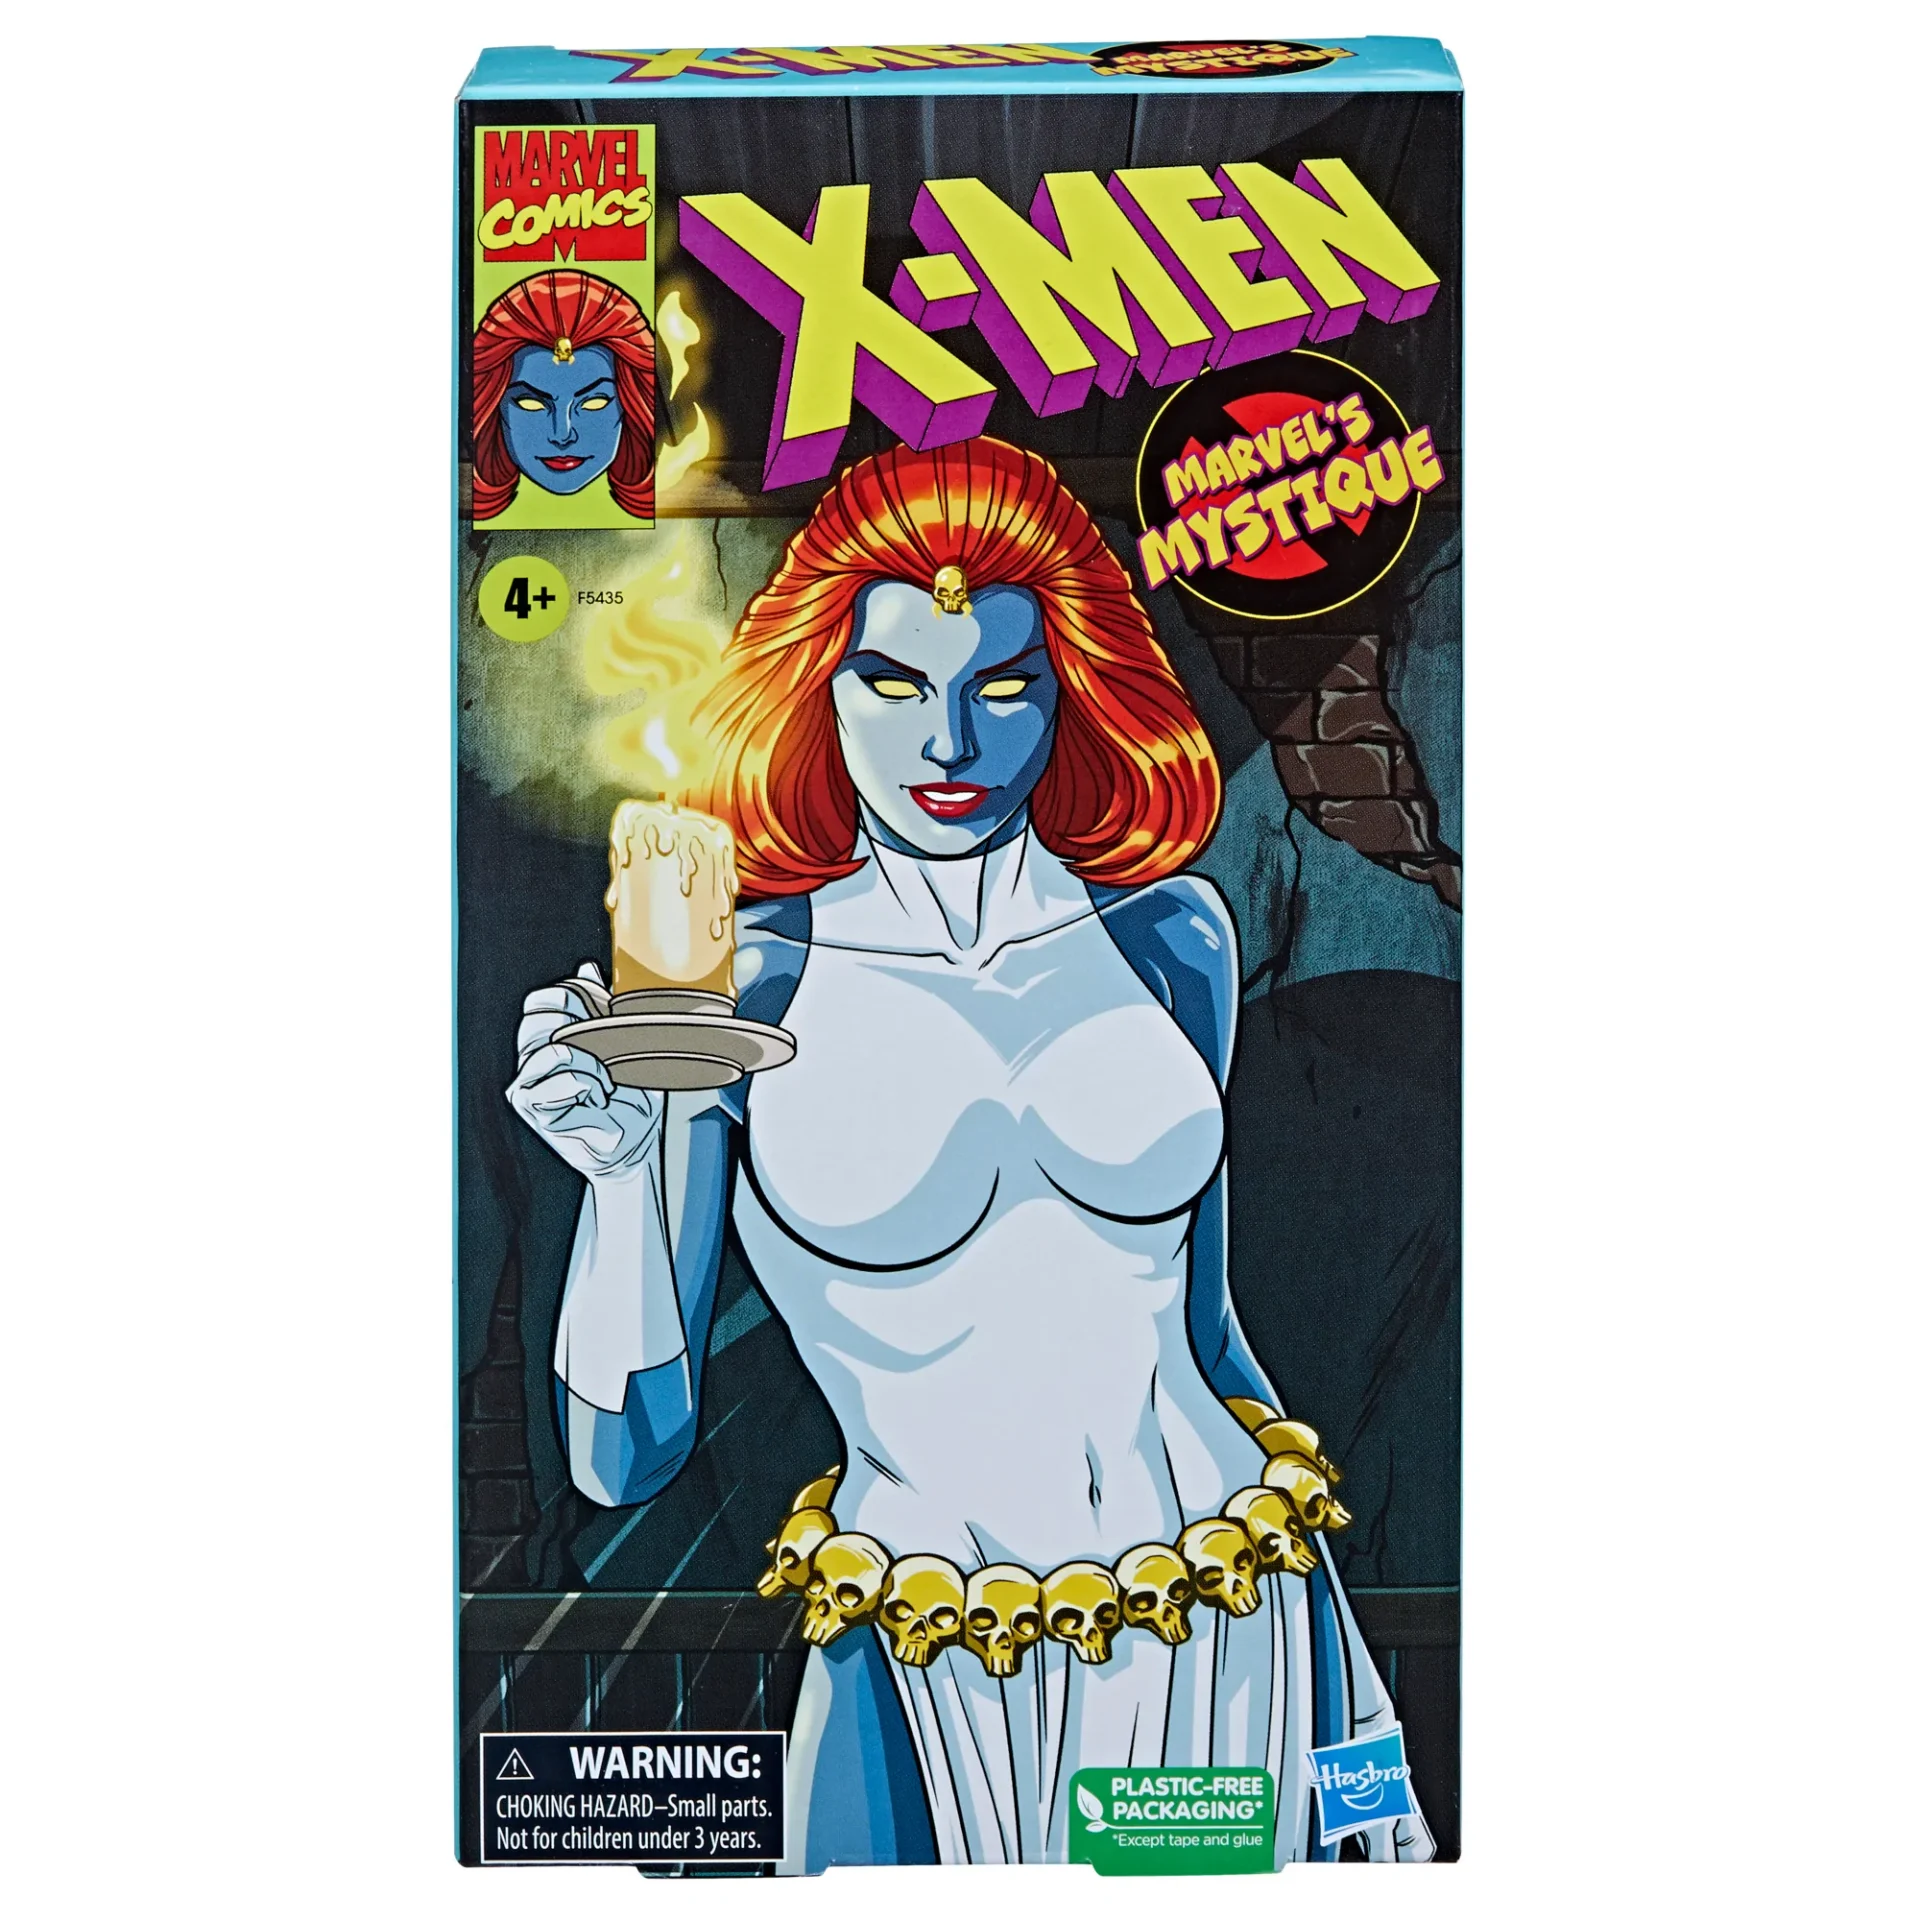 X-Men animated VHS with Mystique as cover